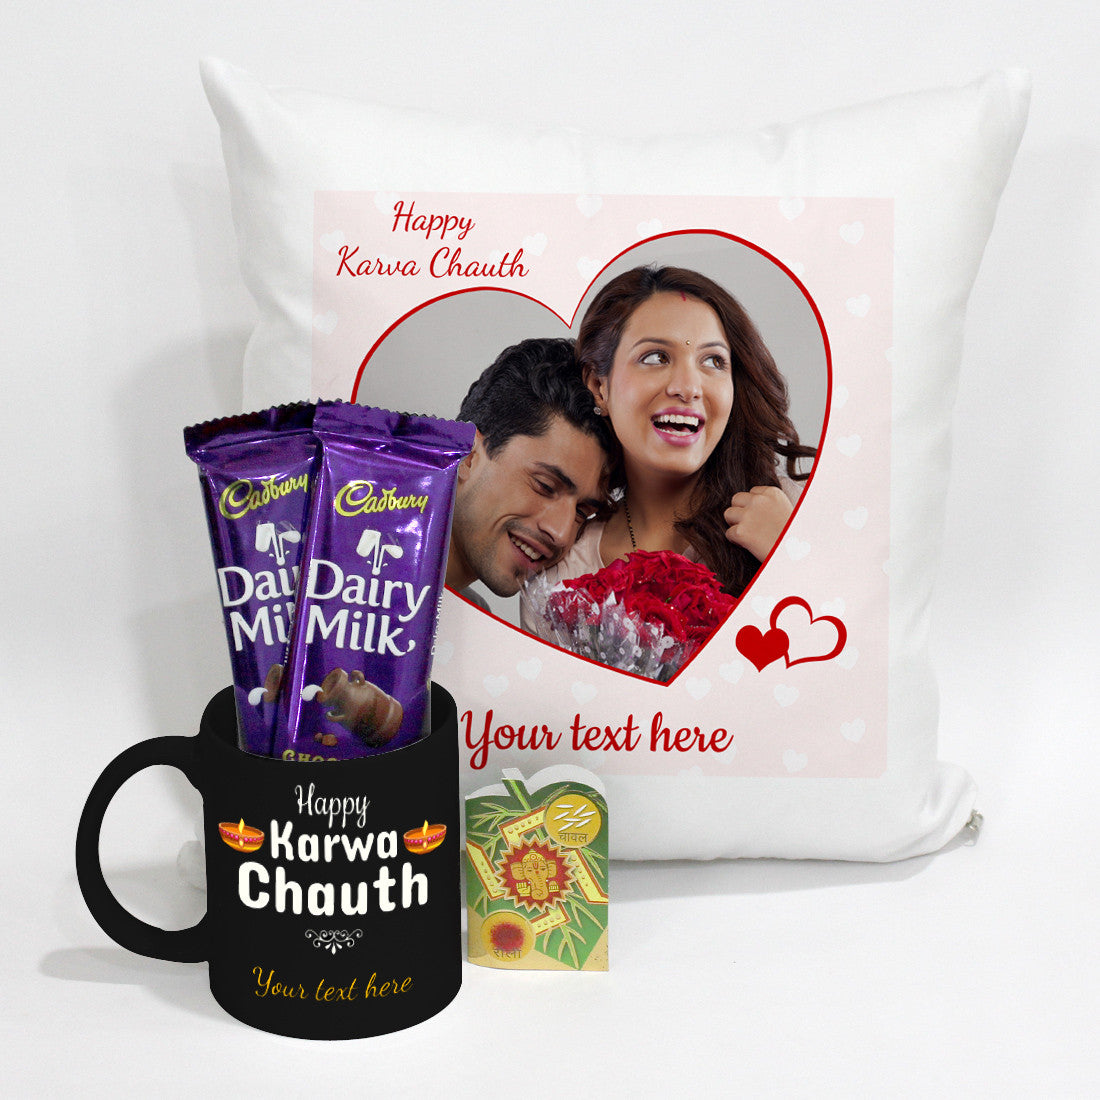 10 gifts ideas on Karva Chauth for your husband and wife